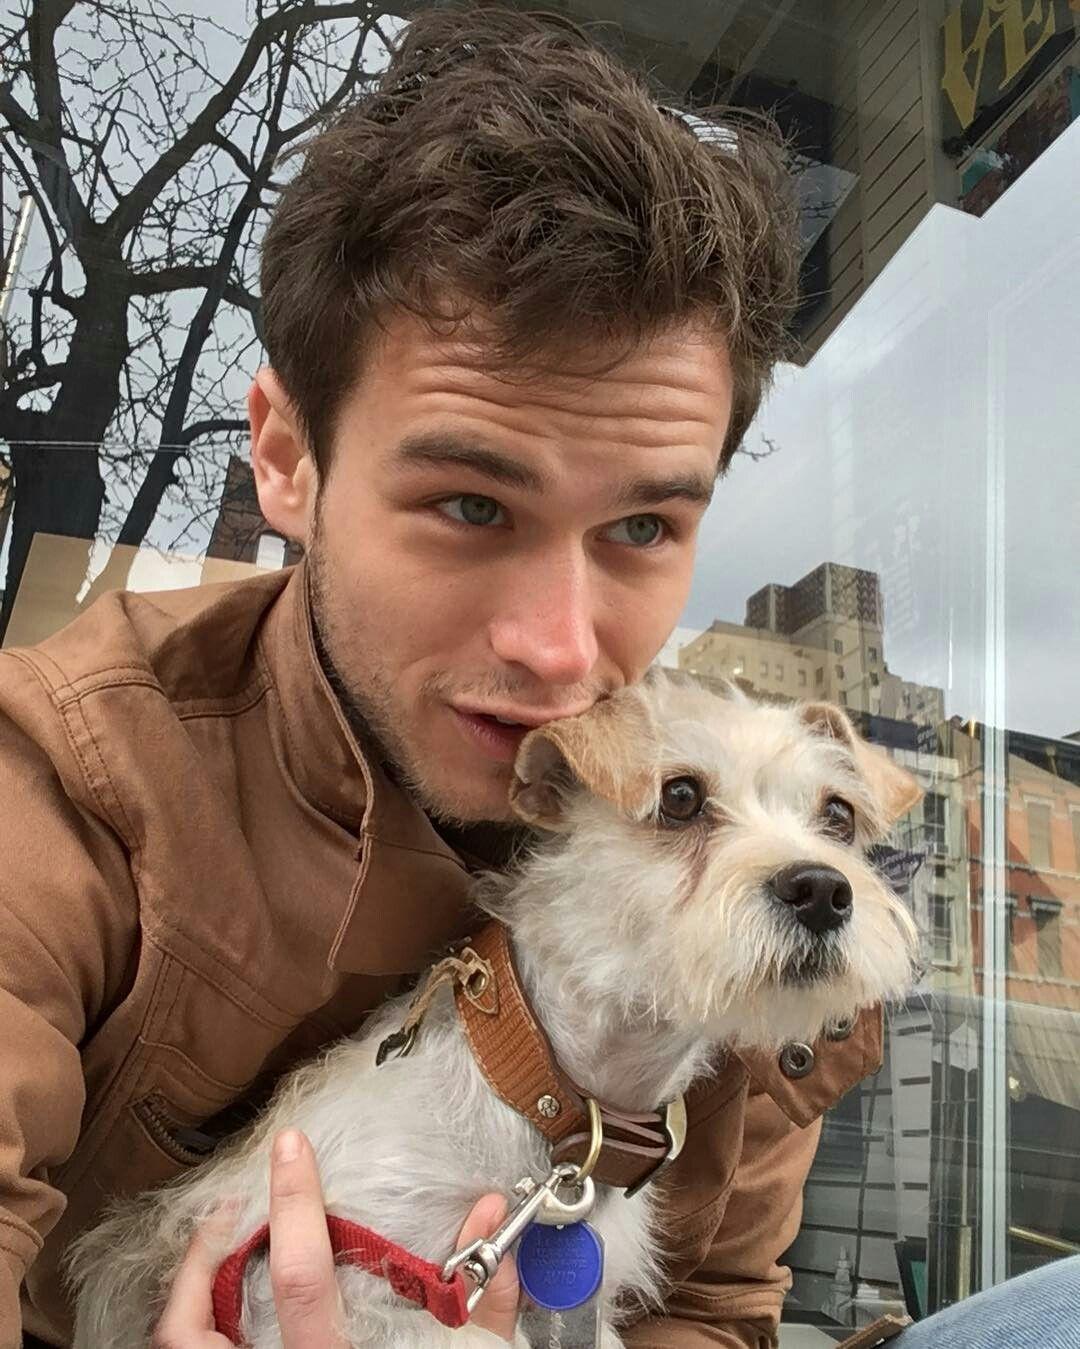 Brandon Flynn. Because after seeing him in 13 reasons why, I have